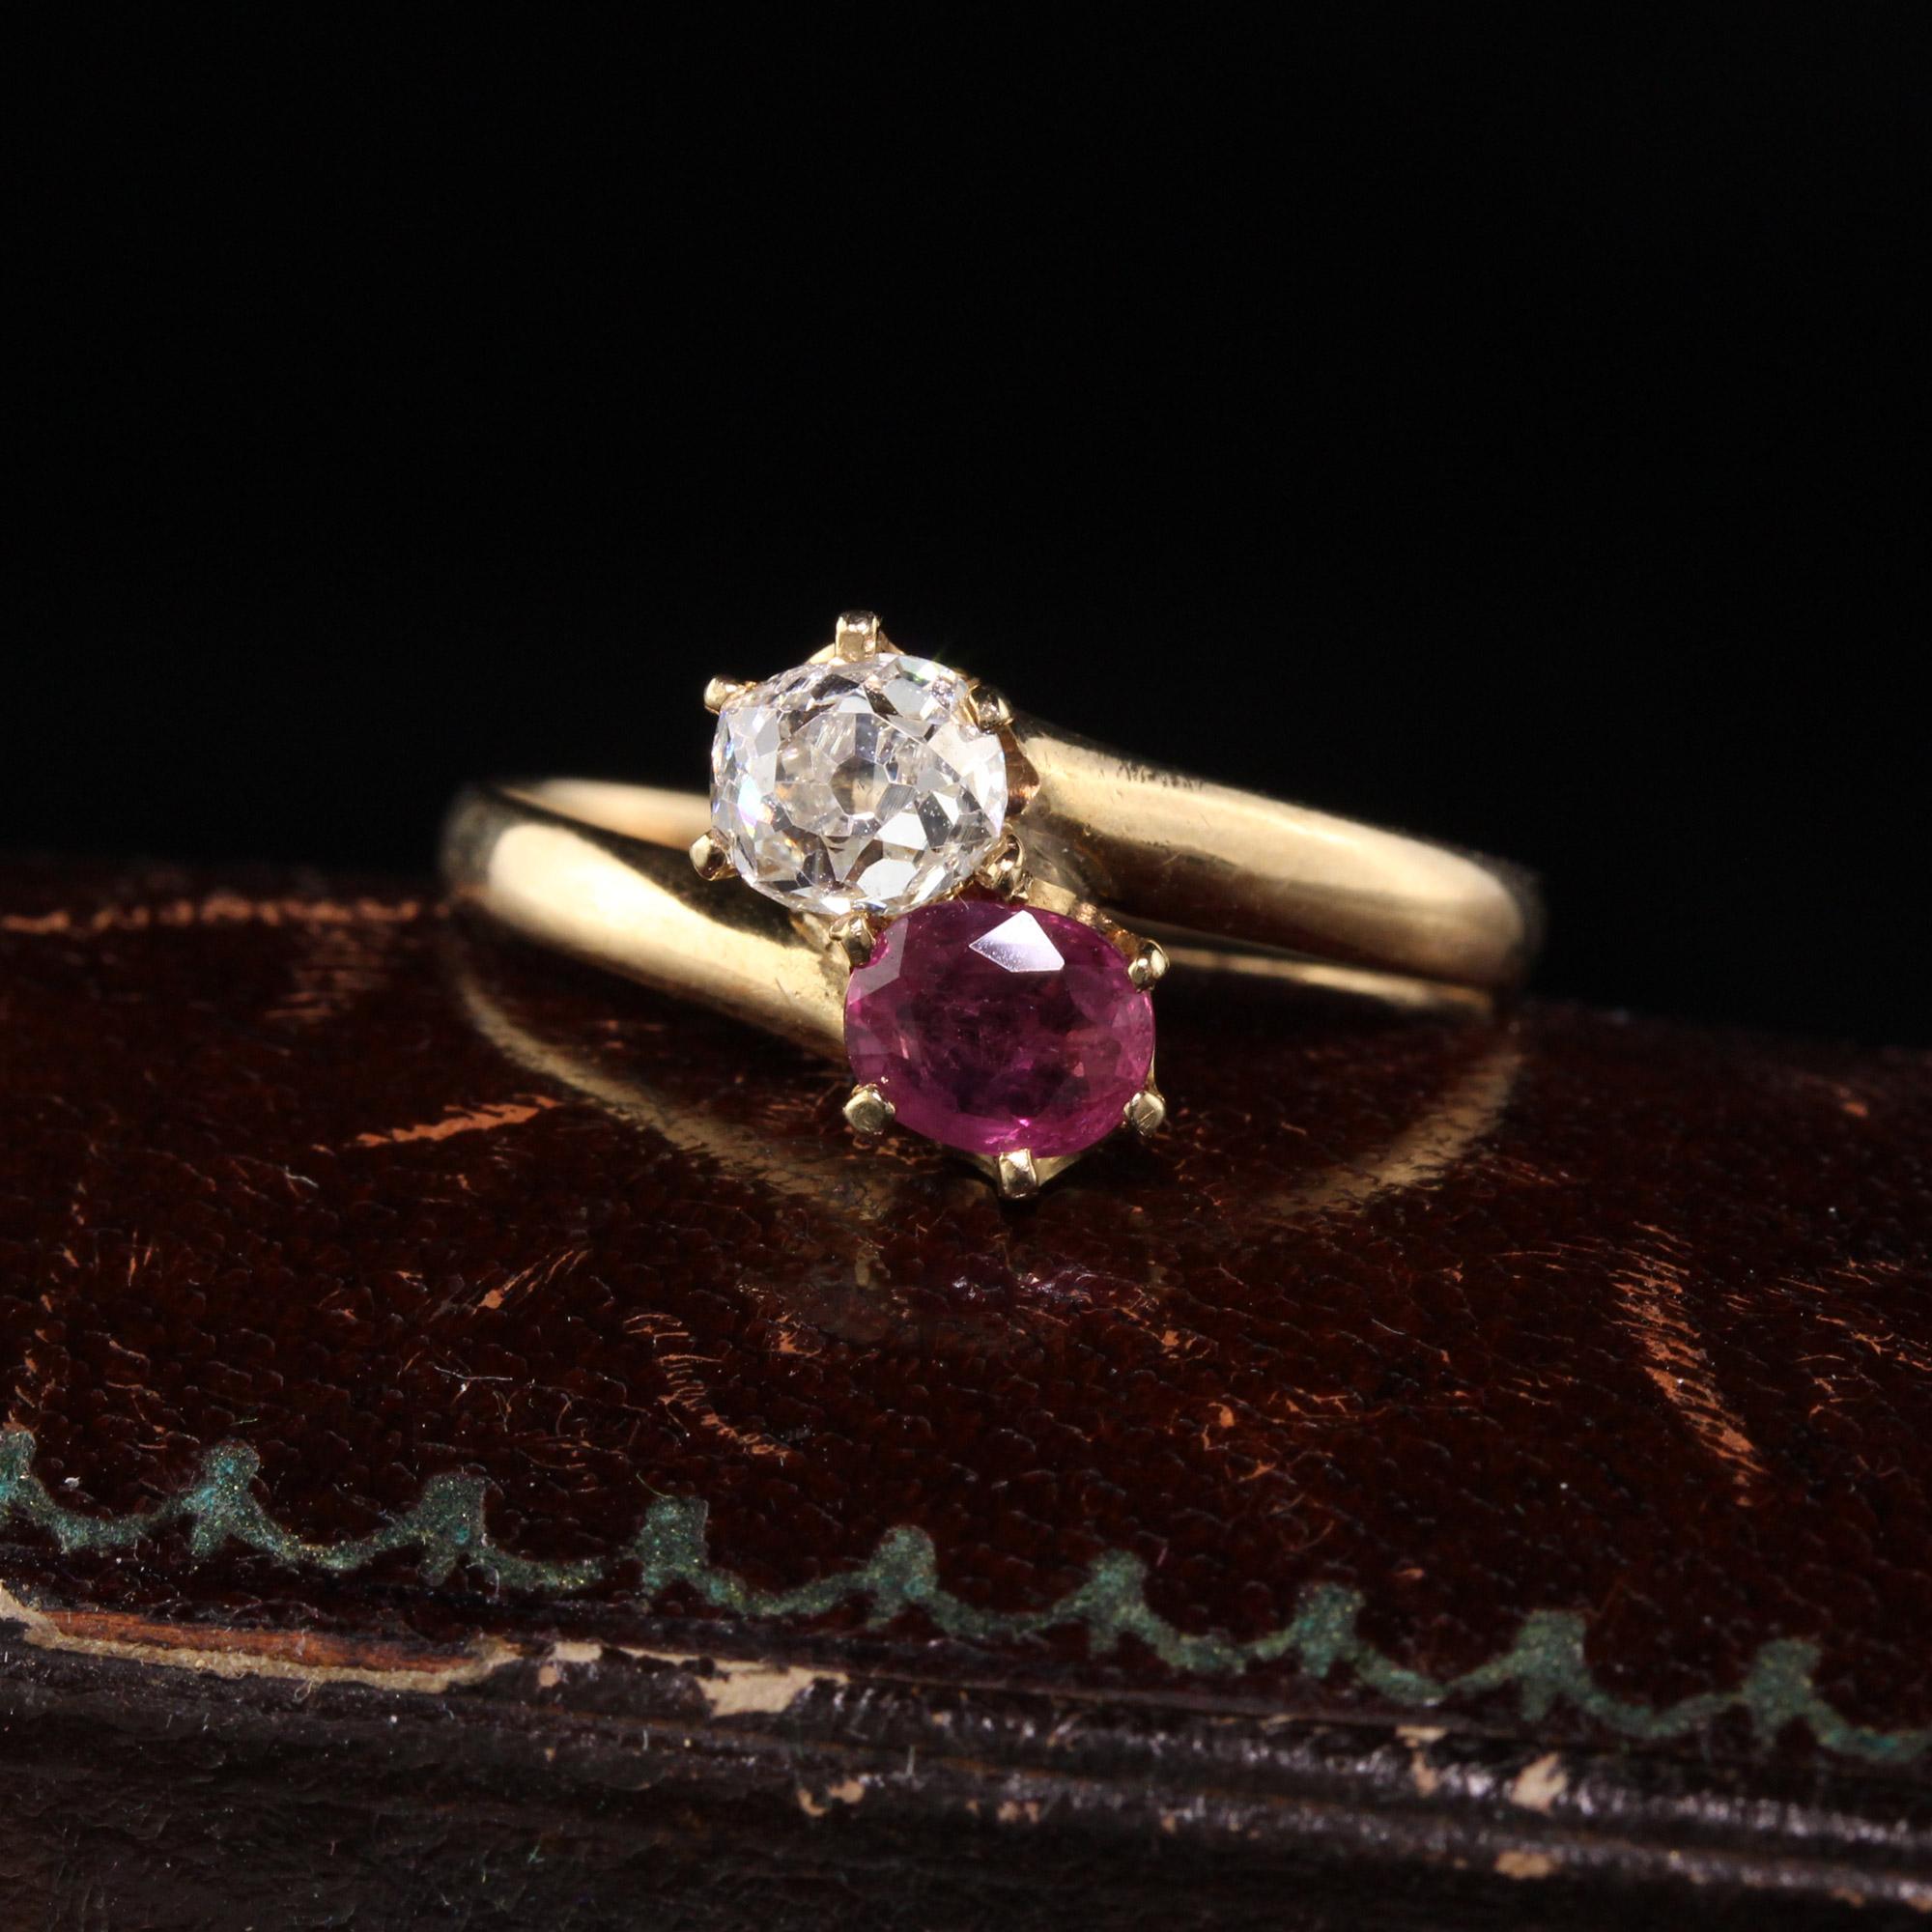 Stunning Toi Et Moi ring with a chunky 0.65 CT Old Mine Cut diamond and a .50 CT Ruby

#R0434

Metal: 14K Yellow Gold 

Weight: 2.4 Grams 

Diamond Weight: Approximately 0.65 CTS

Diamond Color: H

Diamond Clarity: VS2

Ruby Weight: Approximately